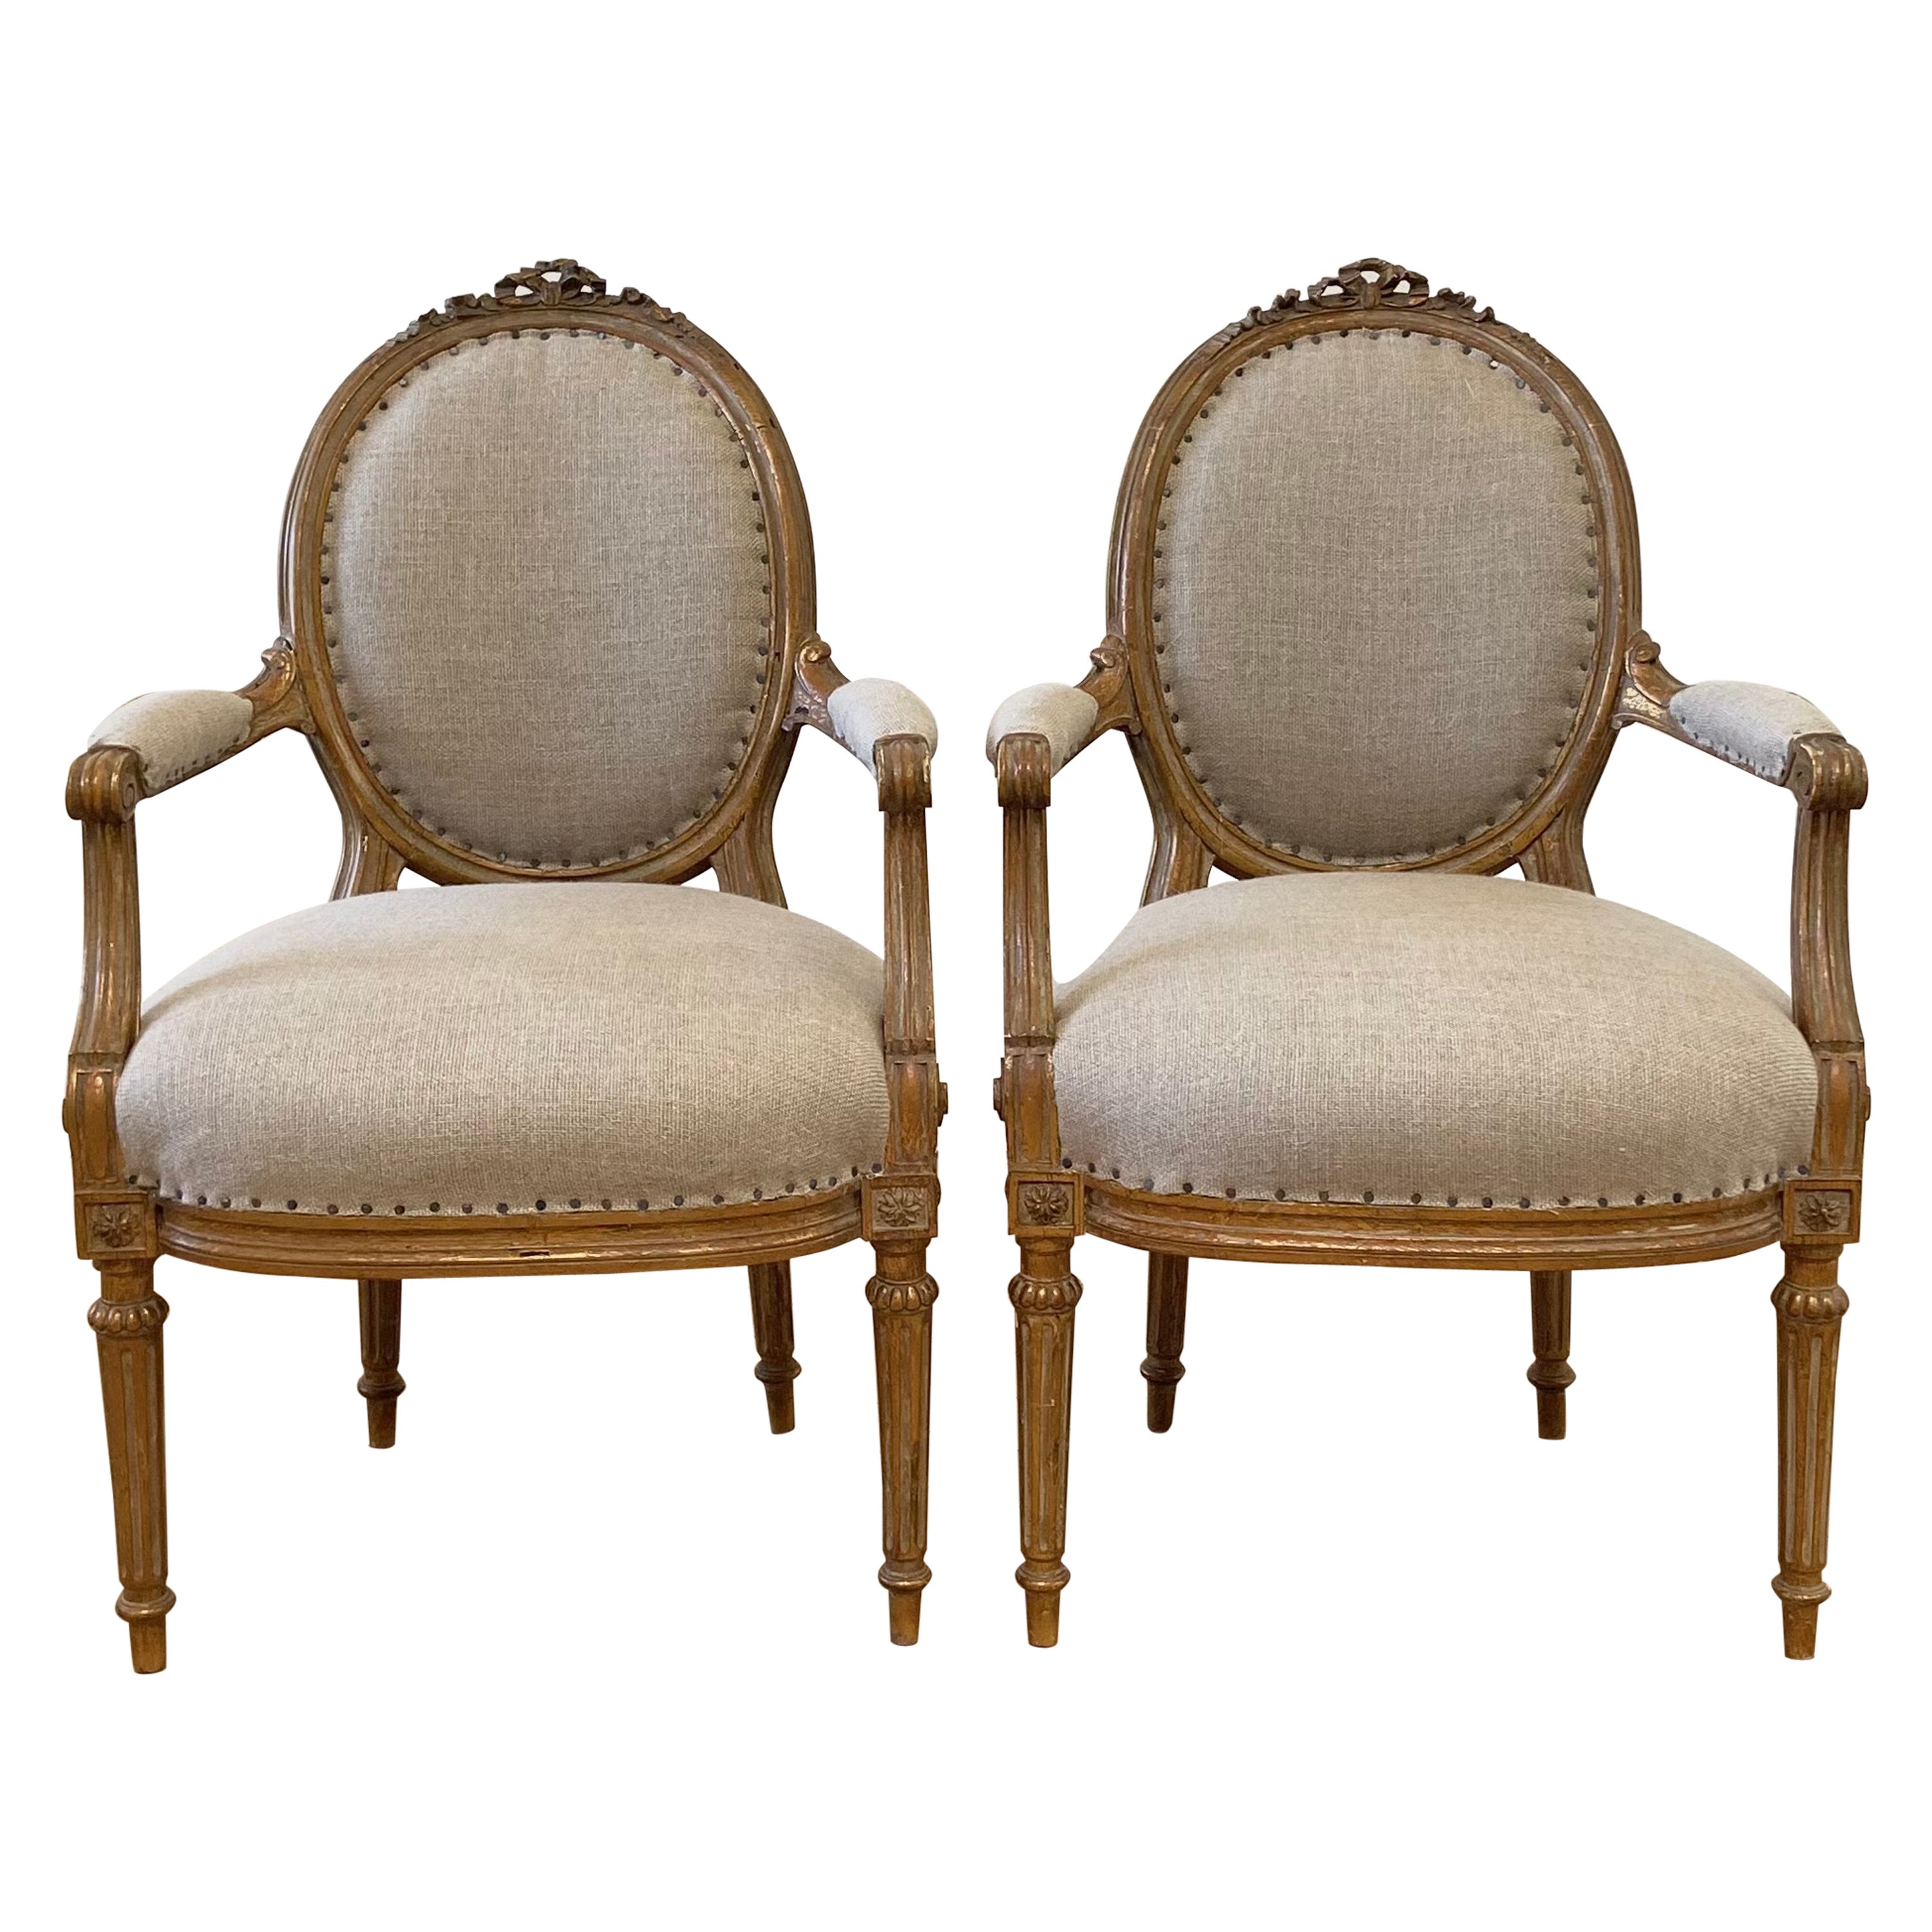 Antique Pair of Gilt Wood Open Arm Chairs Upholstered in Natural Linen